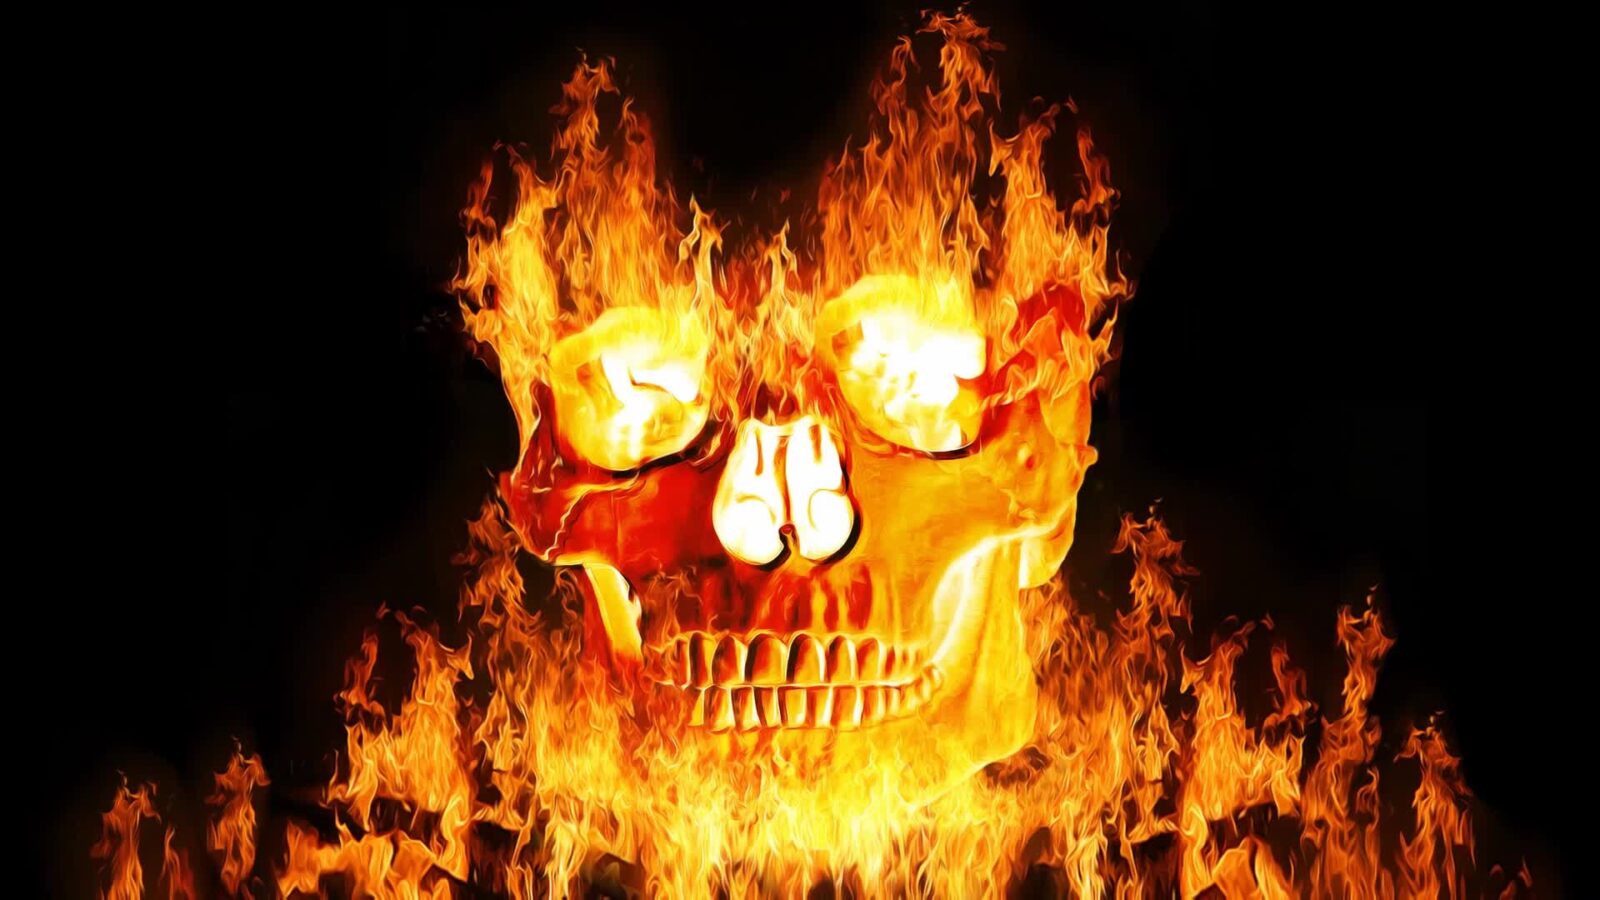 LiveWallpapers4Free.com | Skull Fire Flame Horror - Animated Live Wallpaper